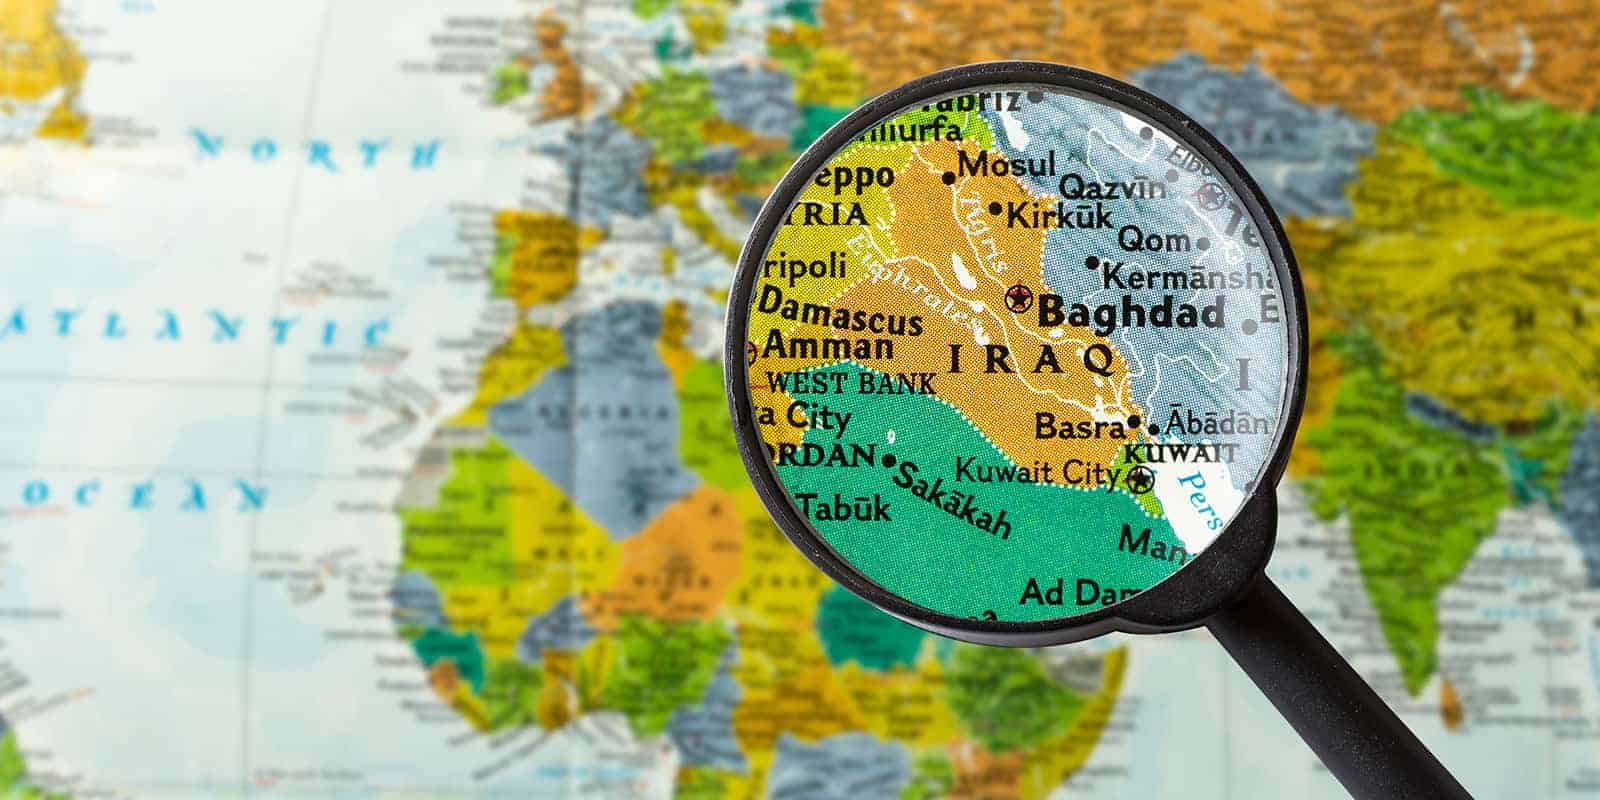 Picture of a magnifying glass held over the country of Iraq on a globe